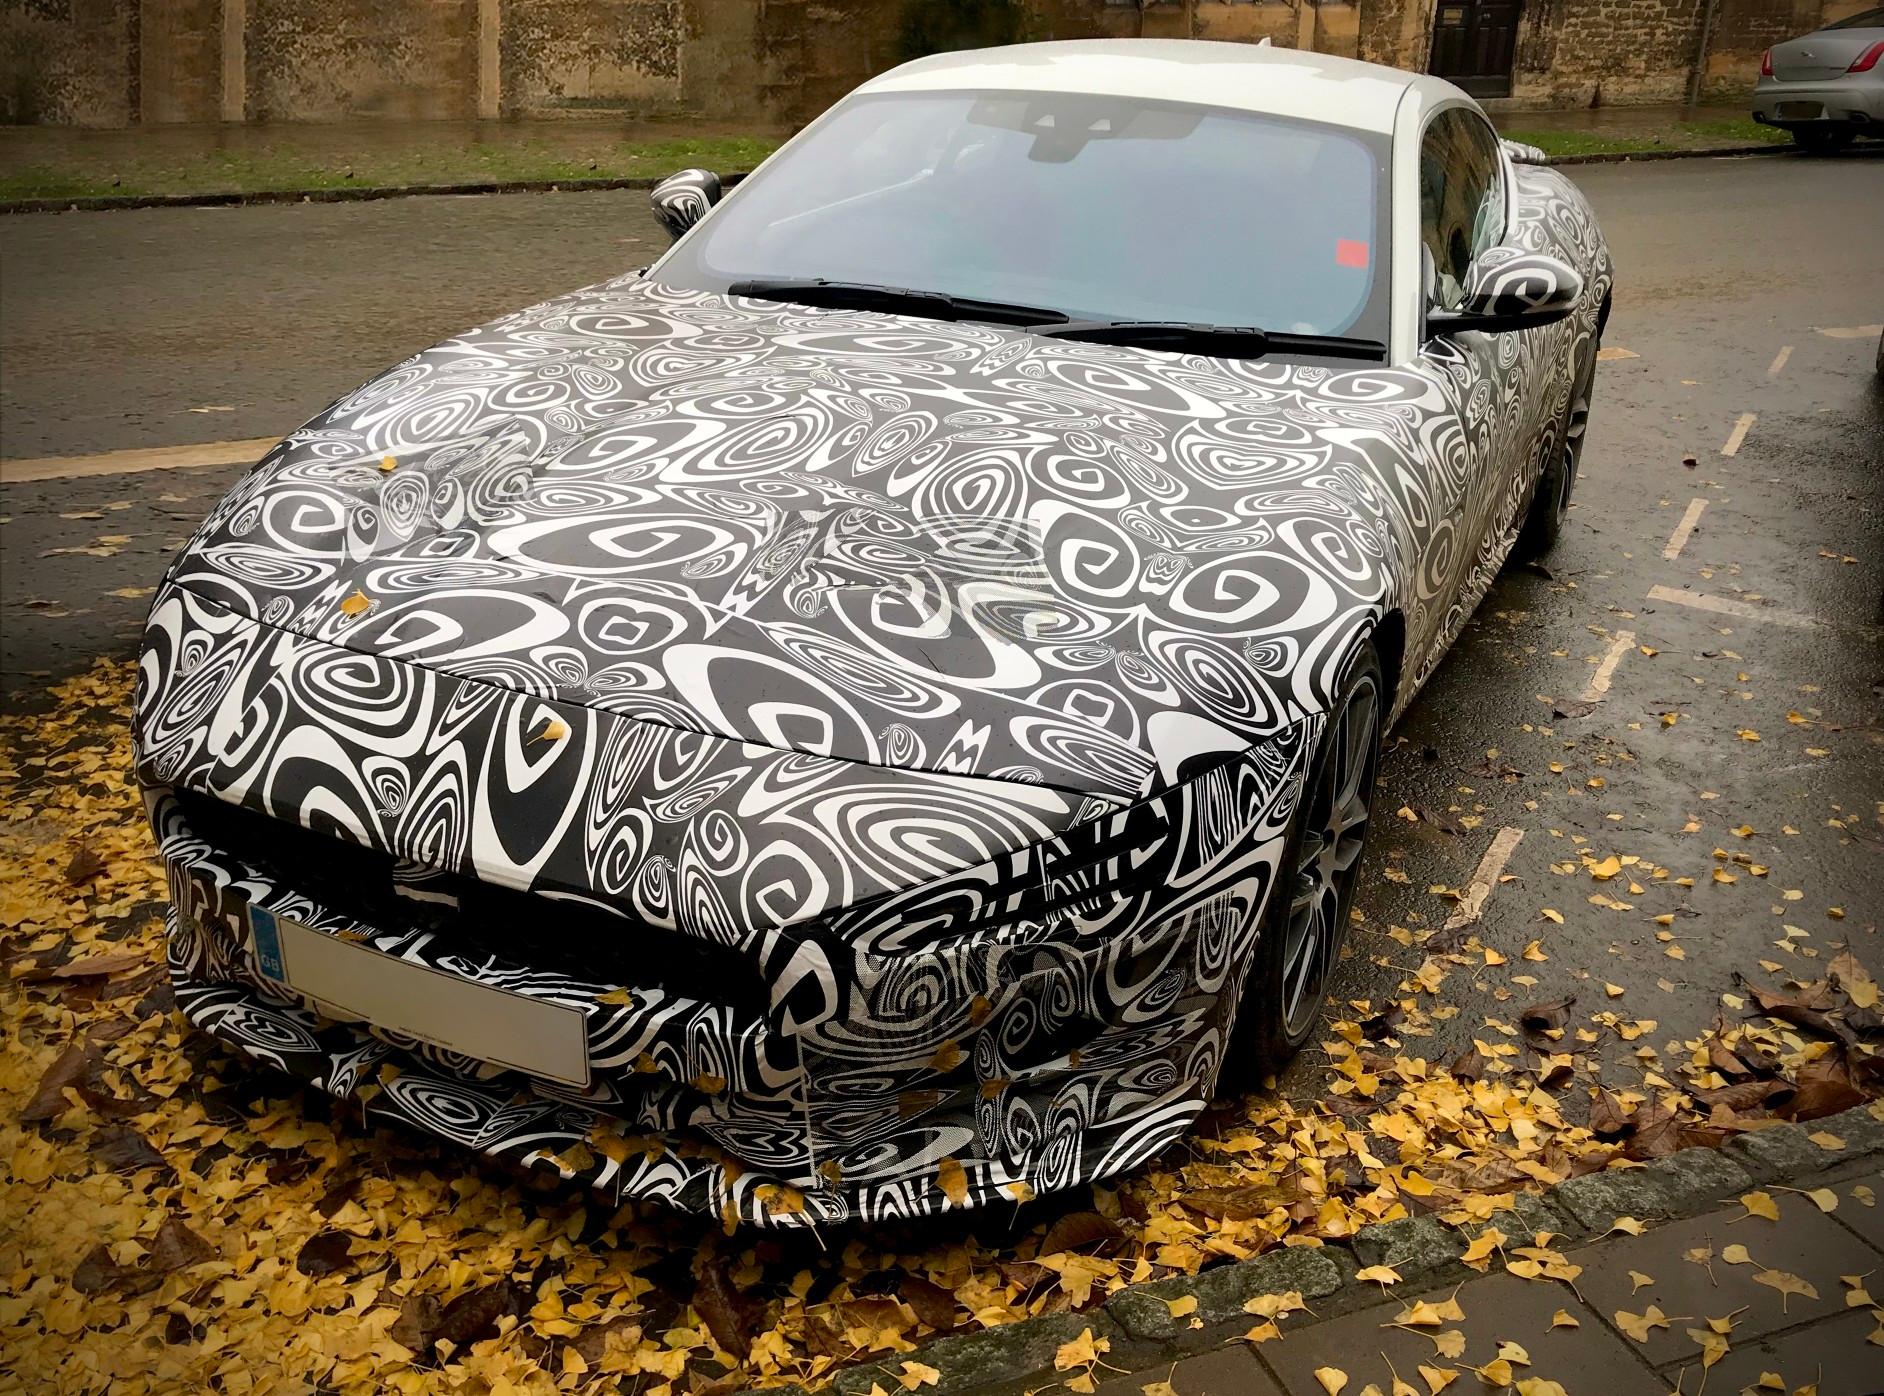 Car with black and white swirling patterns all over it